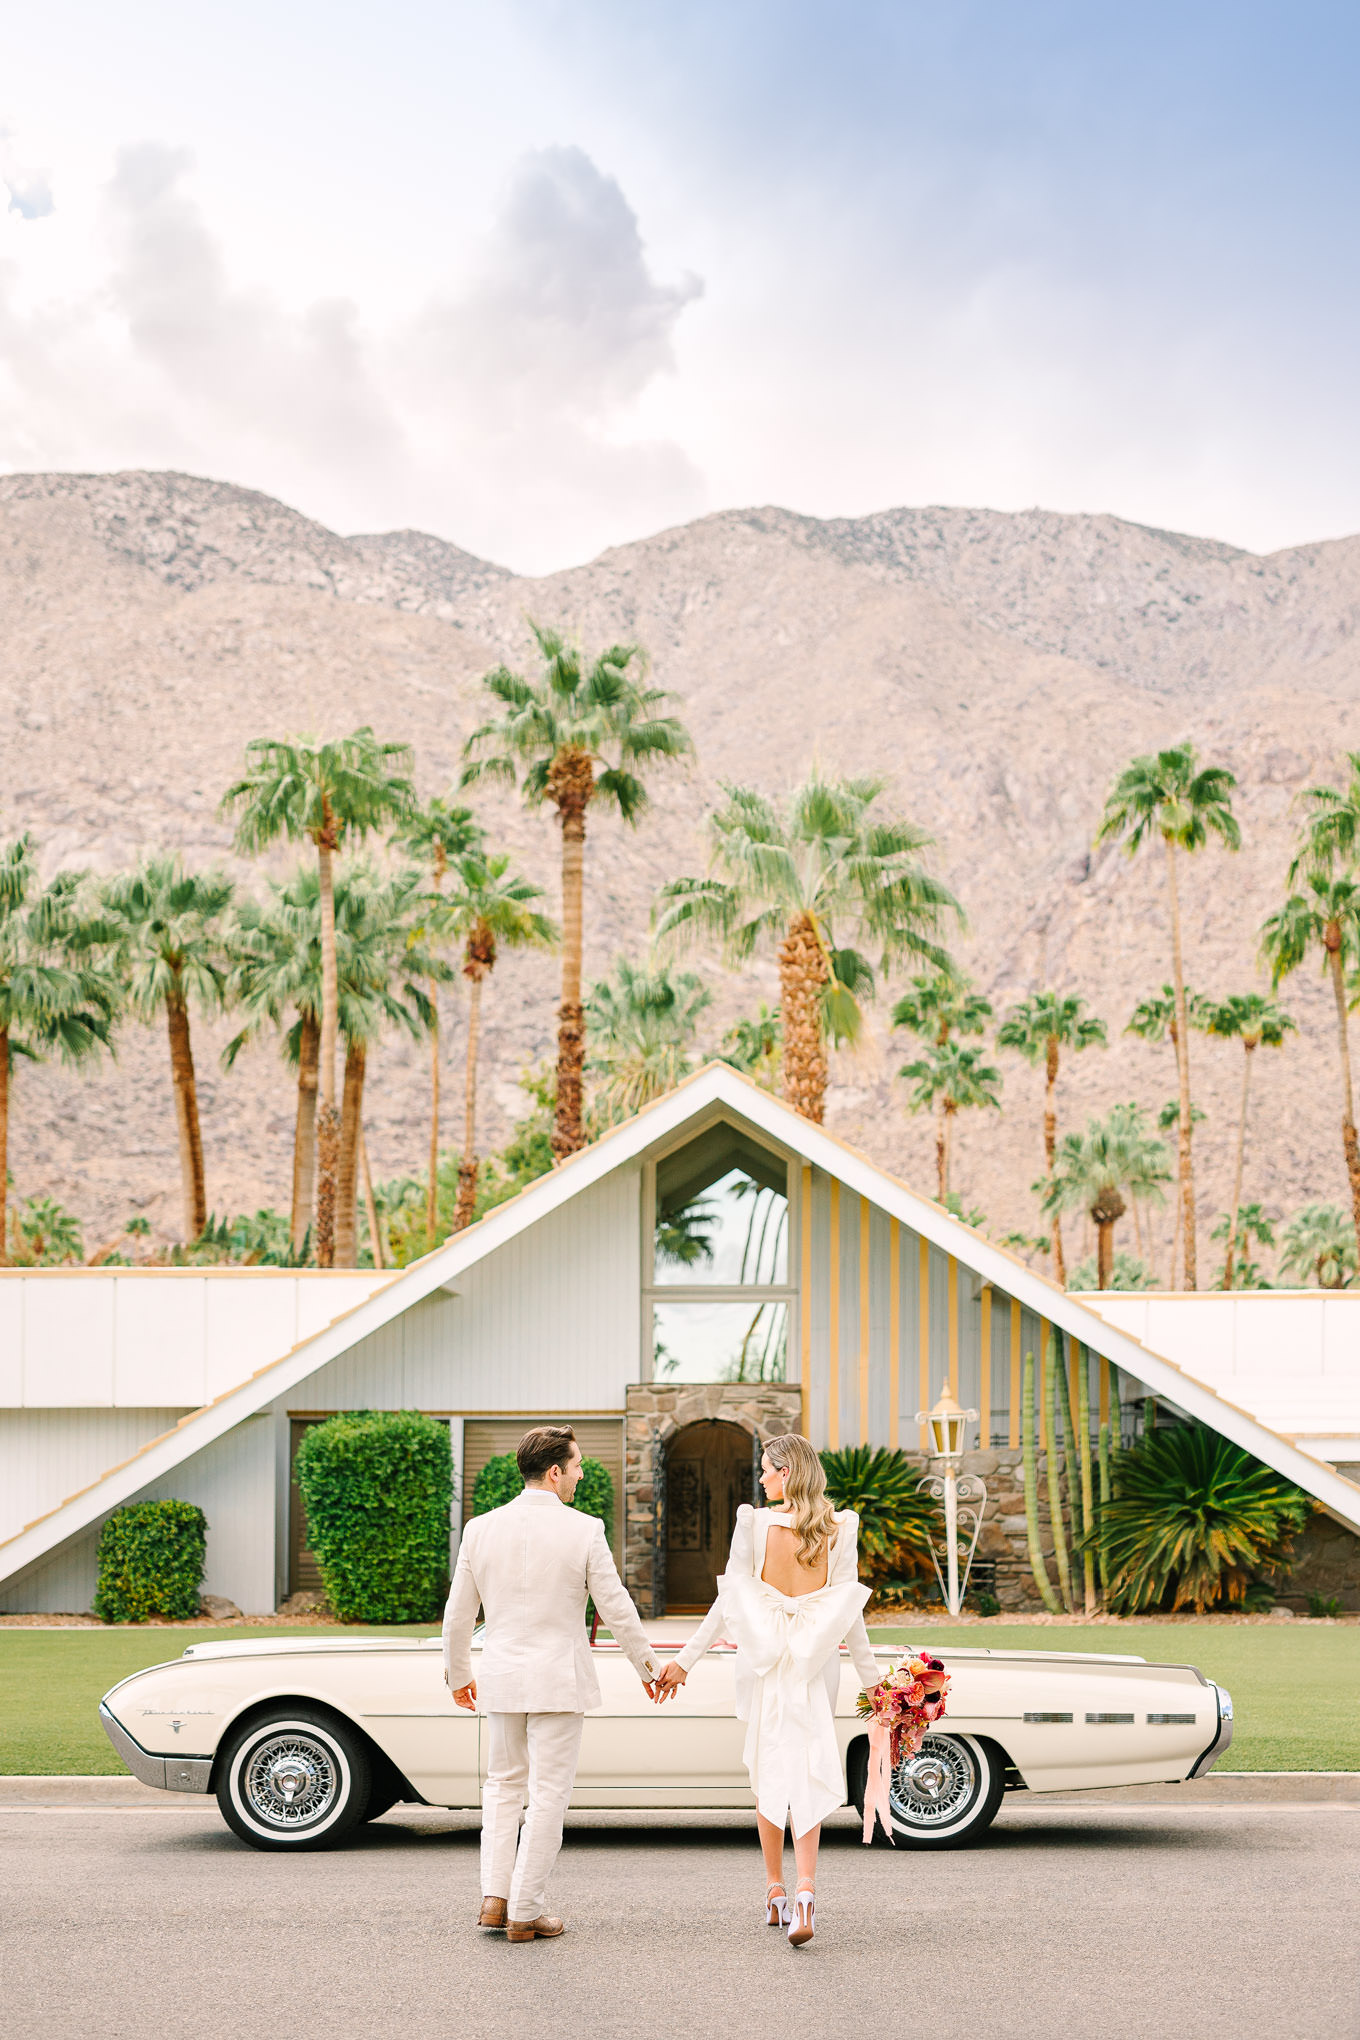 Palm Springs elopement | Wedding and elopement photography roundup | Los Angeles and Palm Springs  photographer | #losangeleswedding #palmspringswedding #elopementphotographer

Source: Mary Costa Photography | Los Angeles